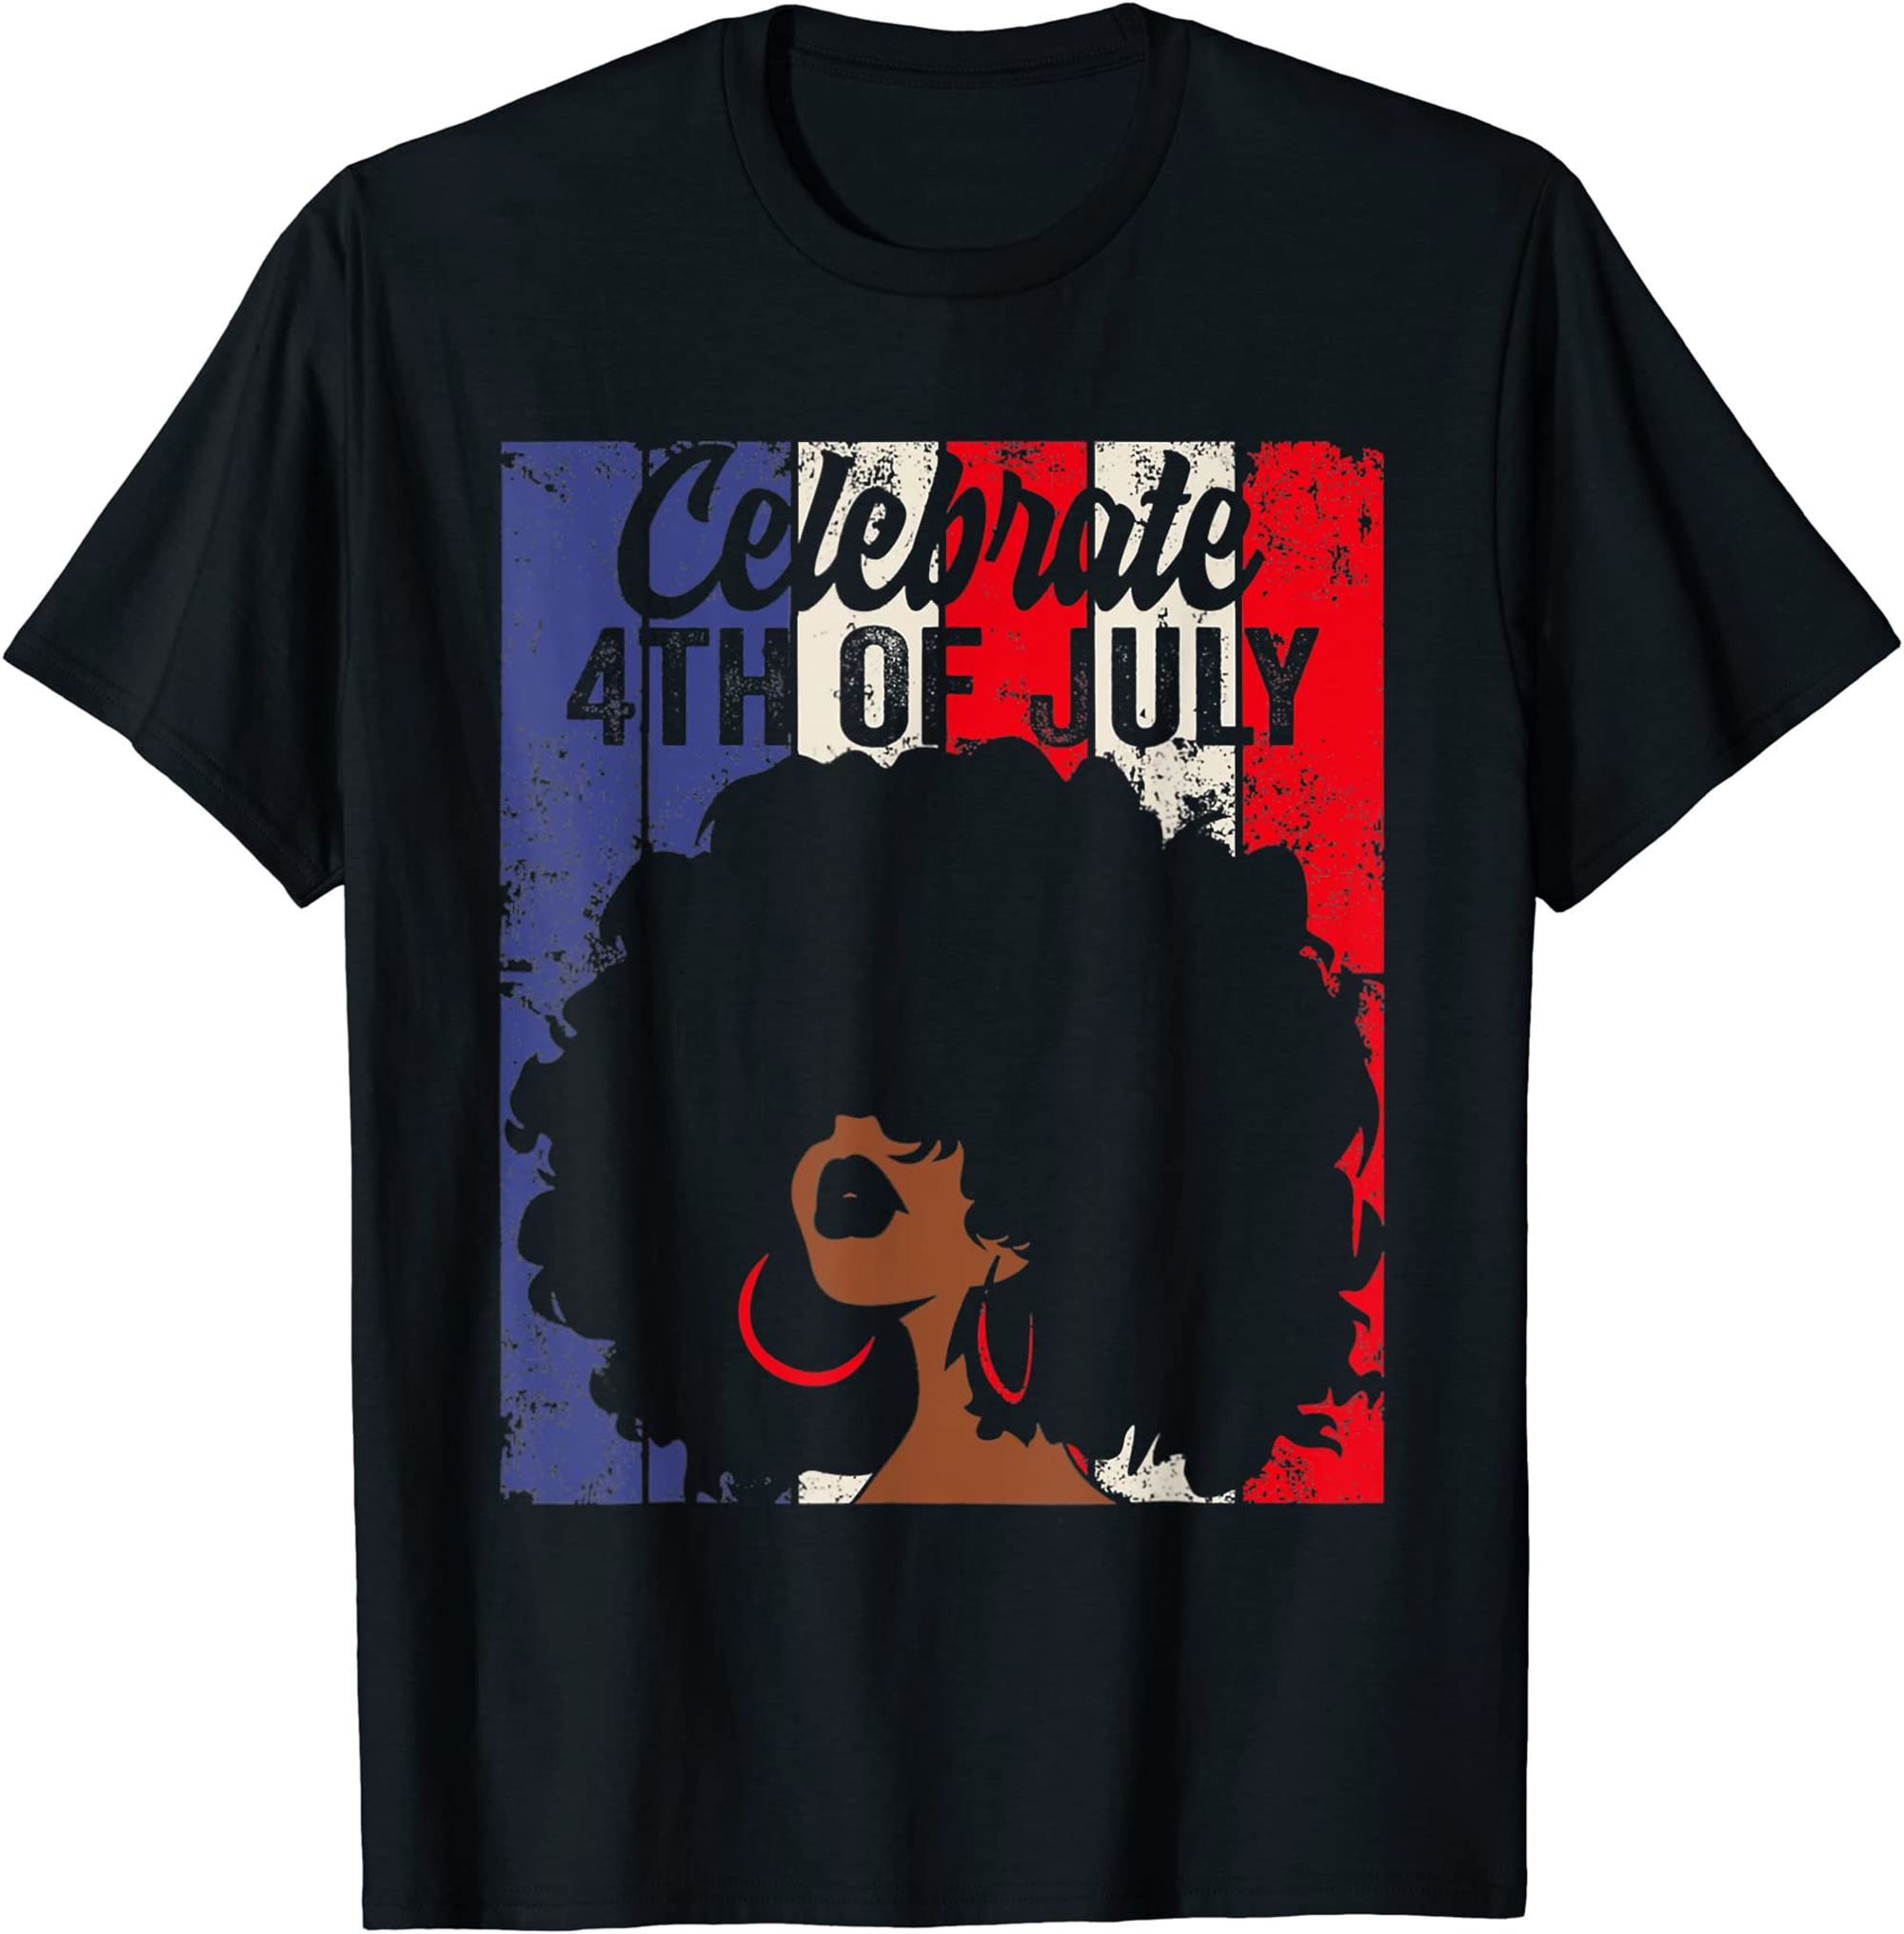 Celebrate 4th Of July Retro African American Flag Black Girl T-shirt Full Size Up To 5xl